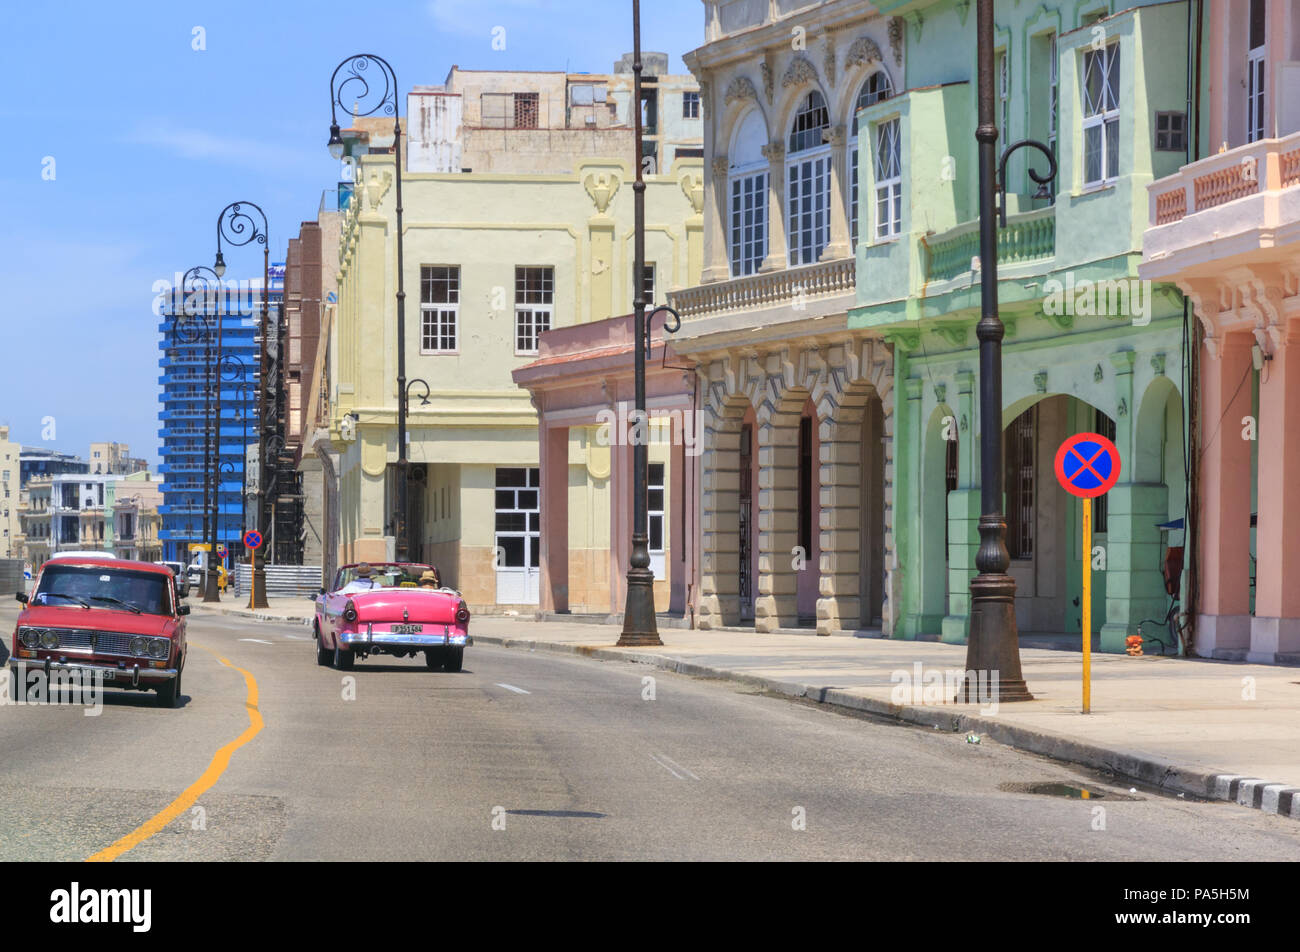 Pastel coloured houses on the Malecon seafront promenade in Havana, Cuba Stock Photo